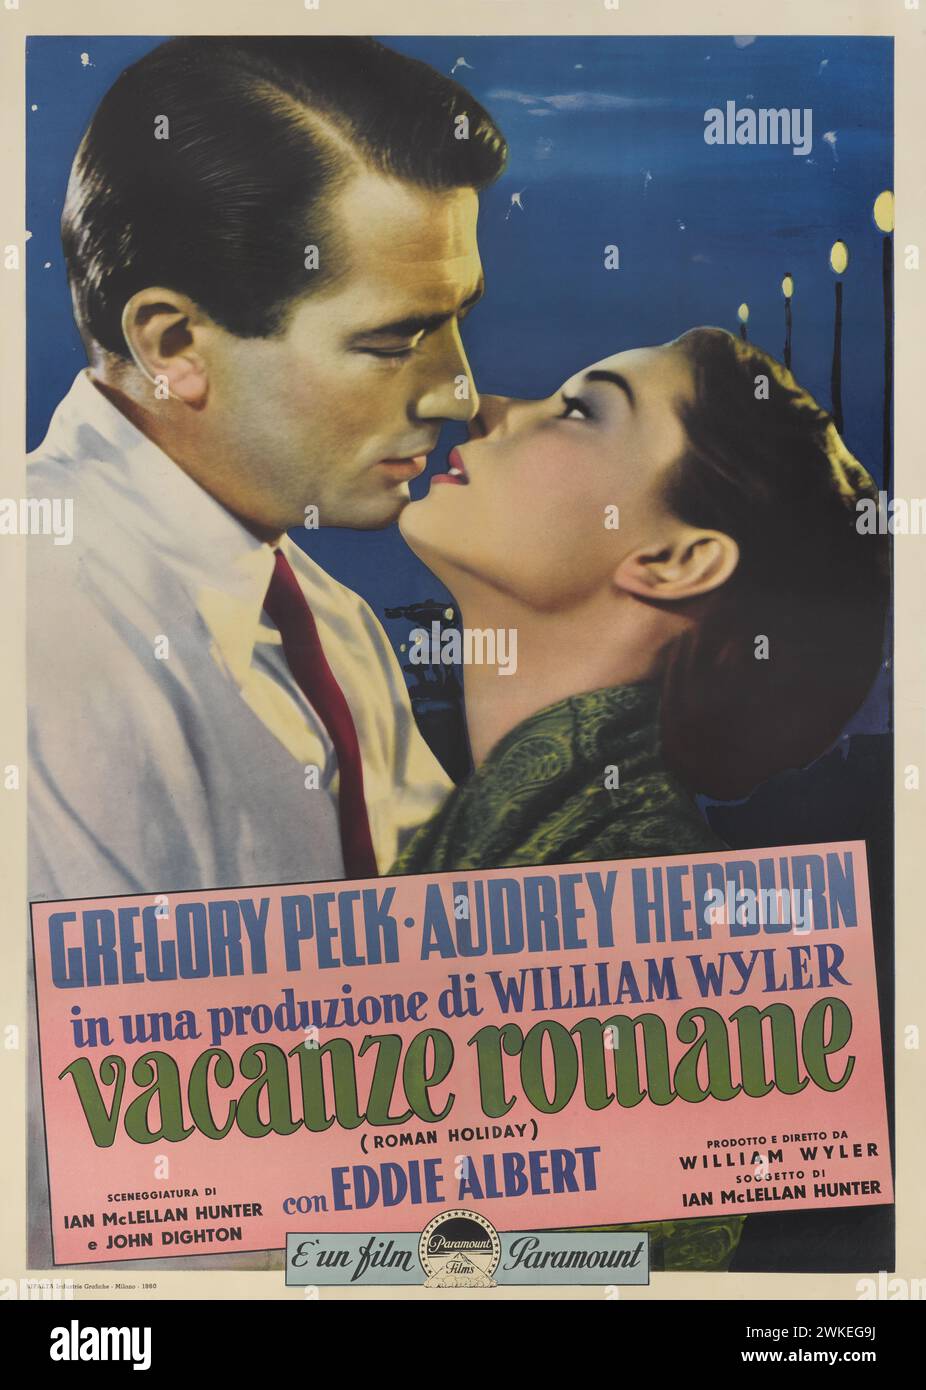 Movie poster 'Vacanze Romane' (Roman Holiday) by William Wyler. Museum: PRIVATE COLLECTION. Author: Ercole Brini. Stock Photo